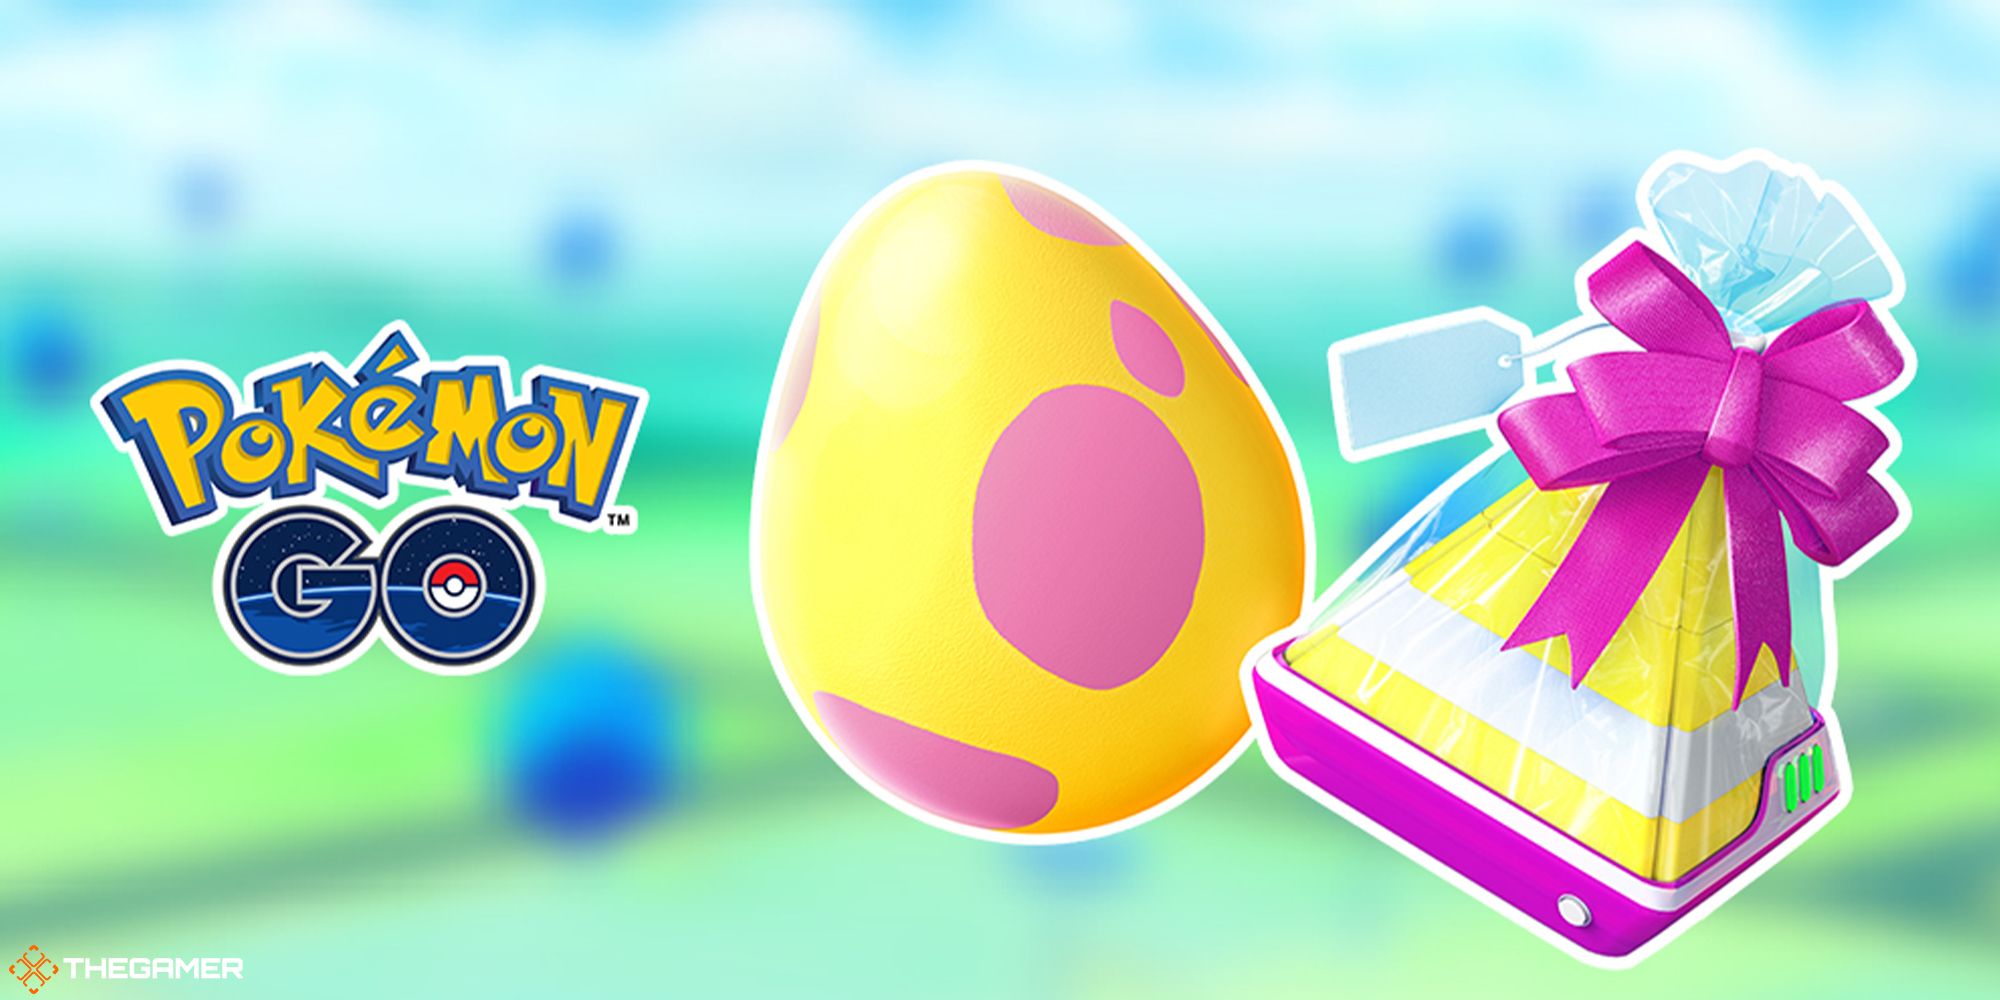 Pokemon Go - an egg and a gift